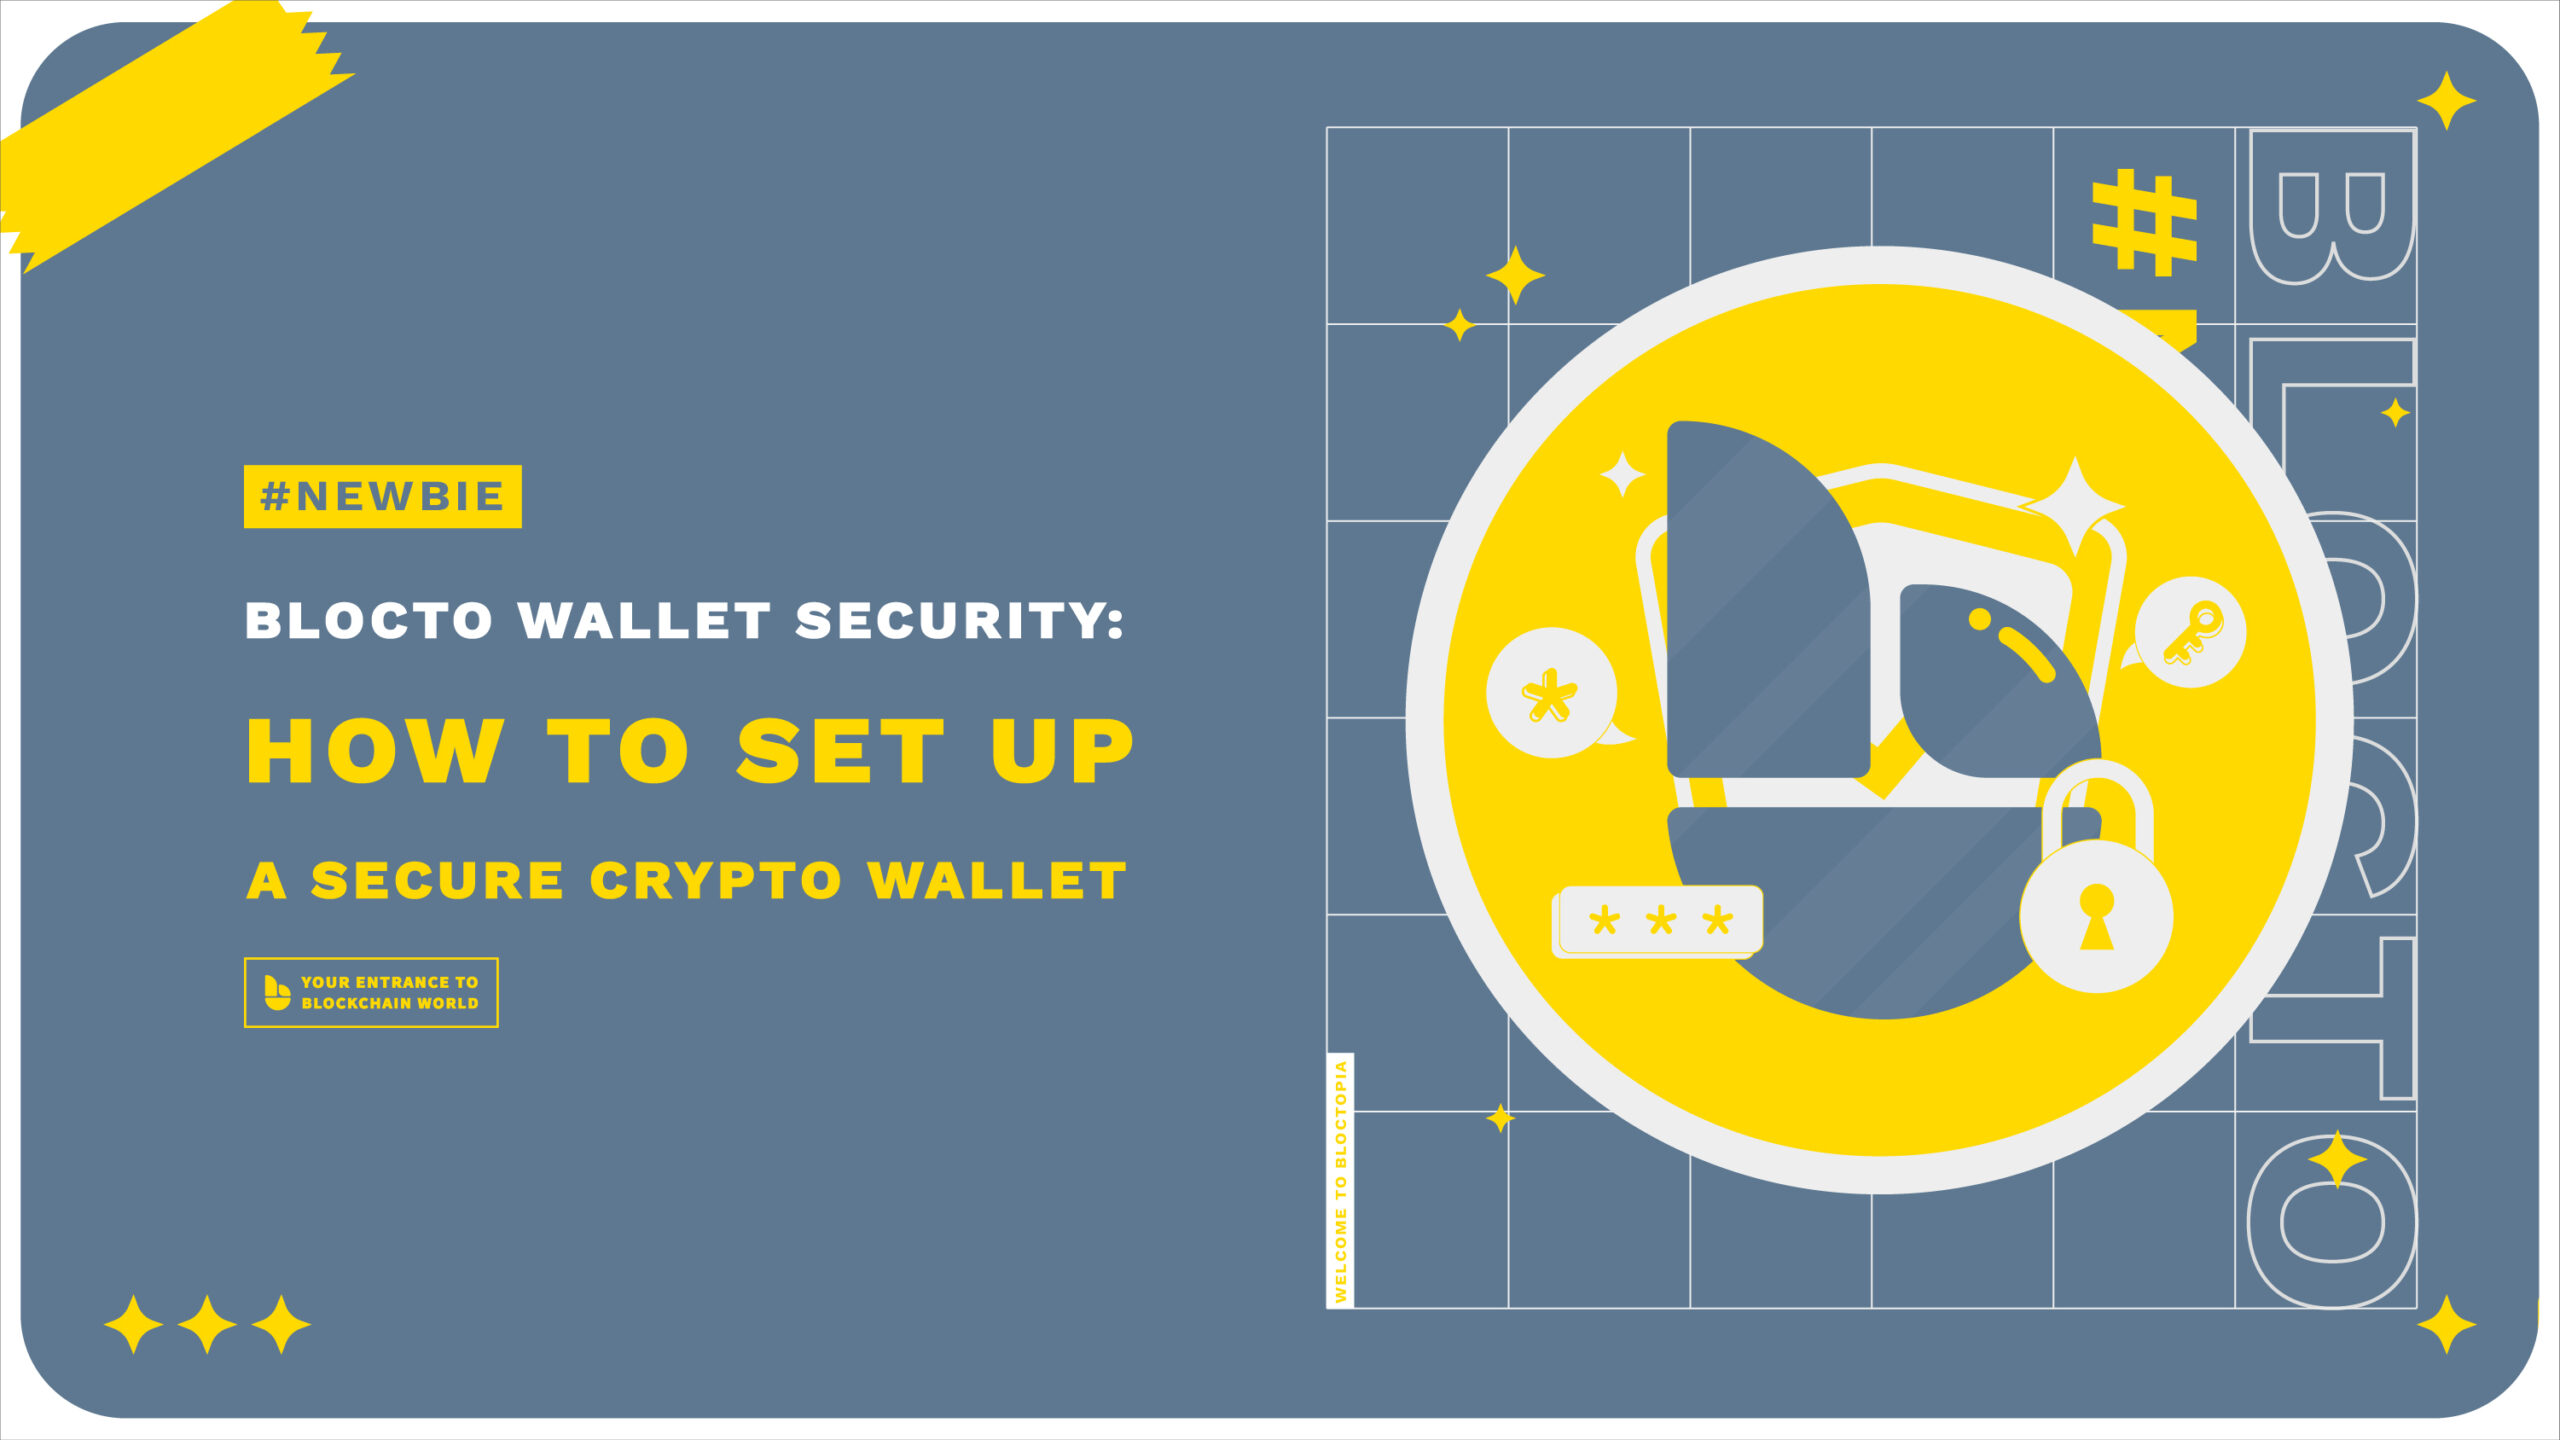 How to Set Up a Secure Crypto Wallet